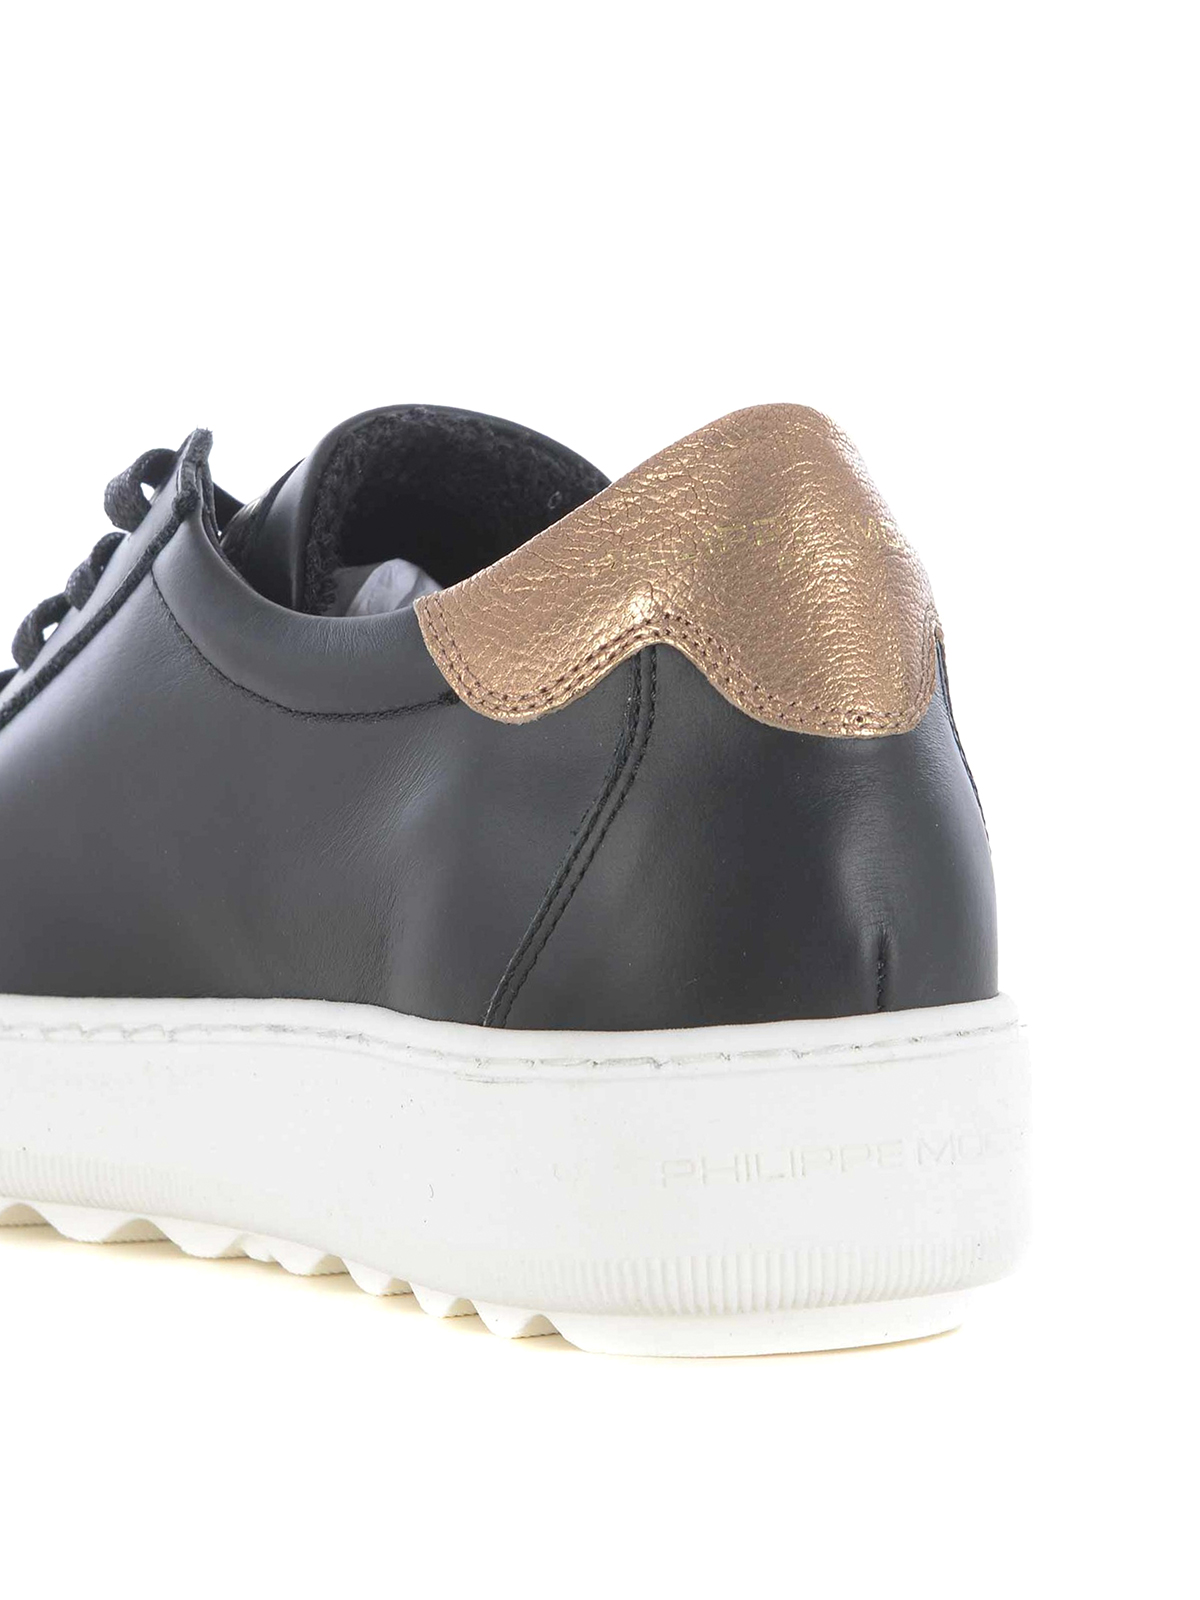 Trainers Philippe Model - Madeleine black leather low top sneakers